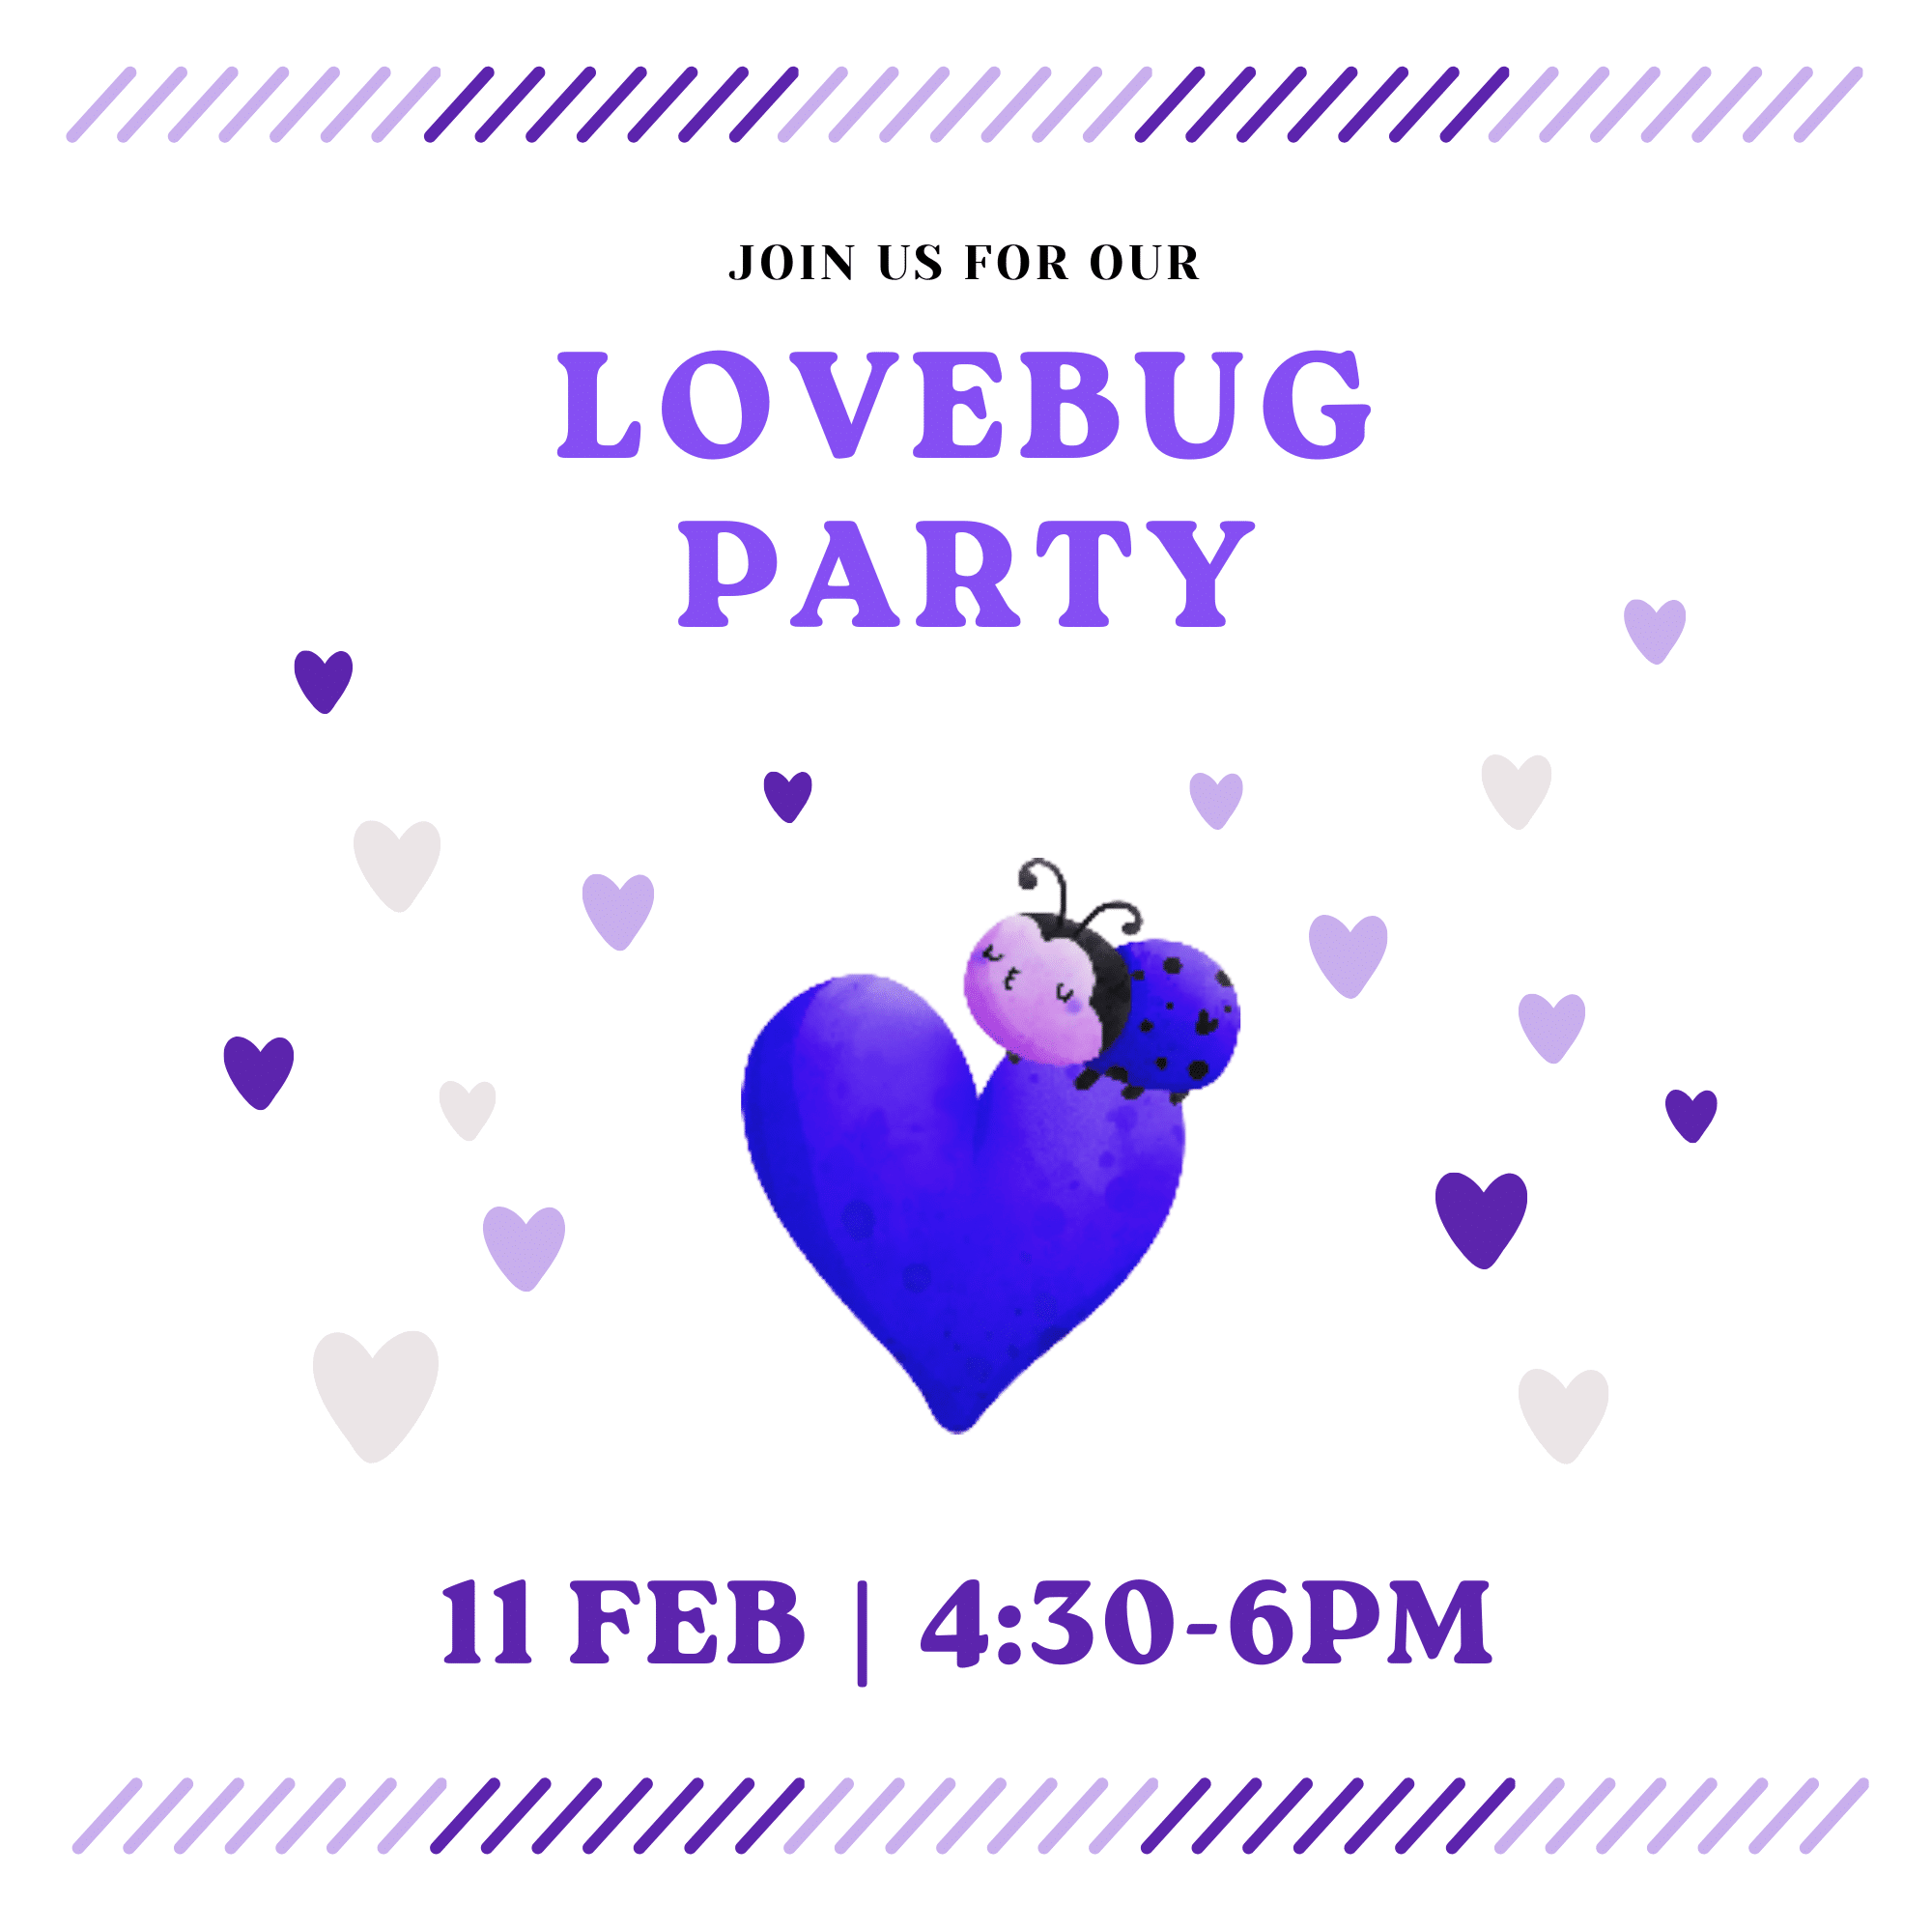 Join us for our LoveBug Party on February 11 from 4:30 p.m. to 6 p.m. with a lady bug on a purple heart